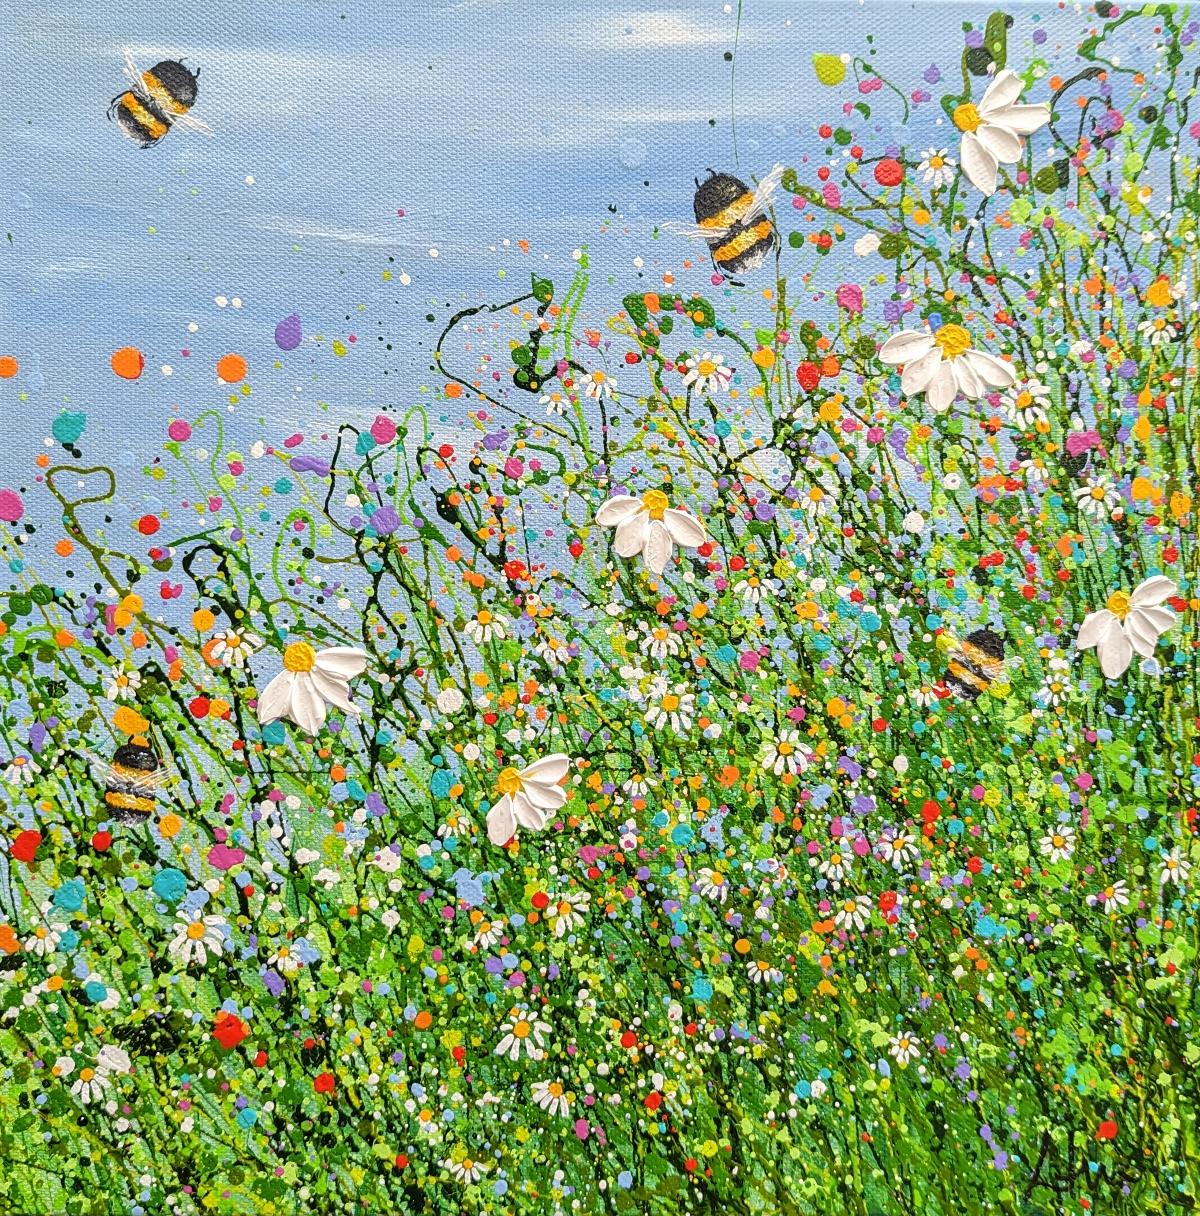 Lucy Moore Landscape Painting - Bumbling Meadows 2, Abstract Floral Painting, Original Landscape Art, Nature